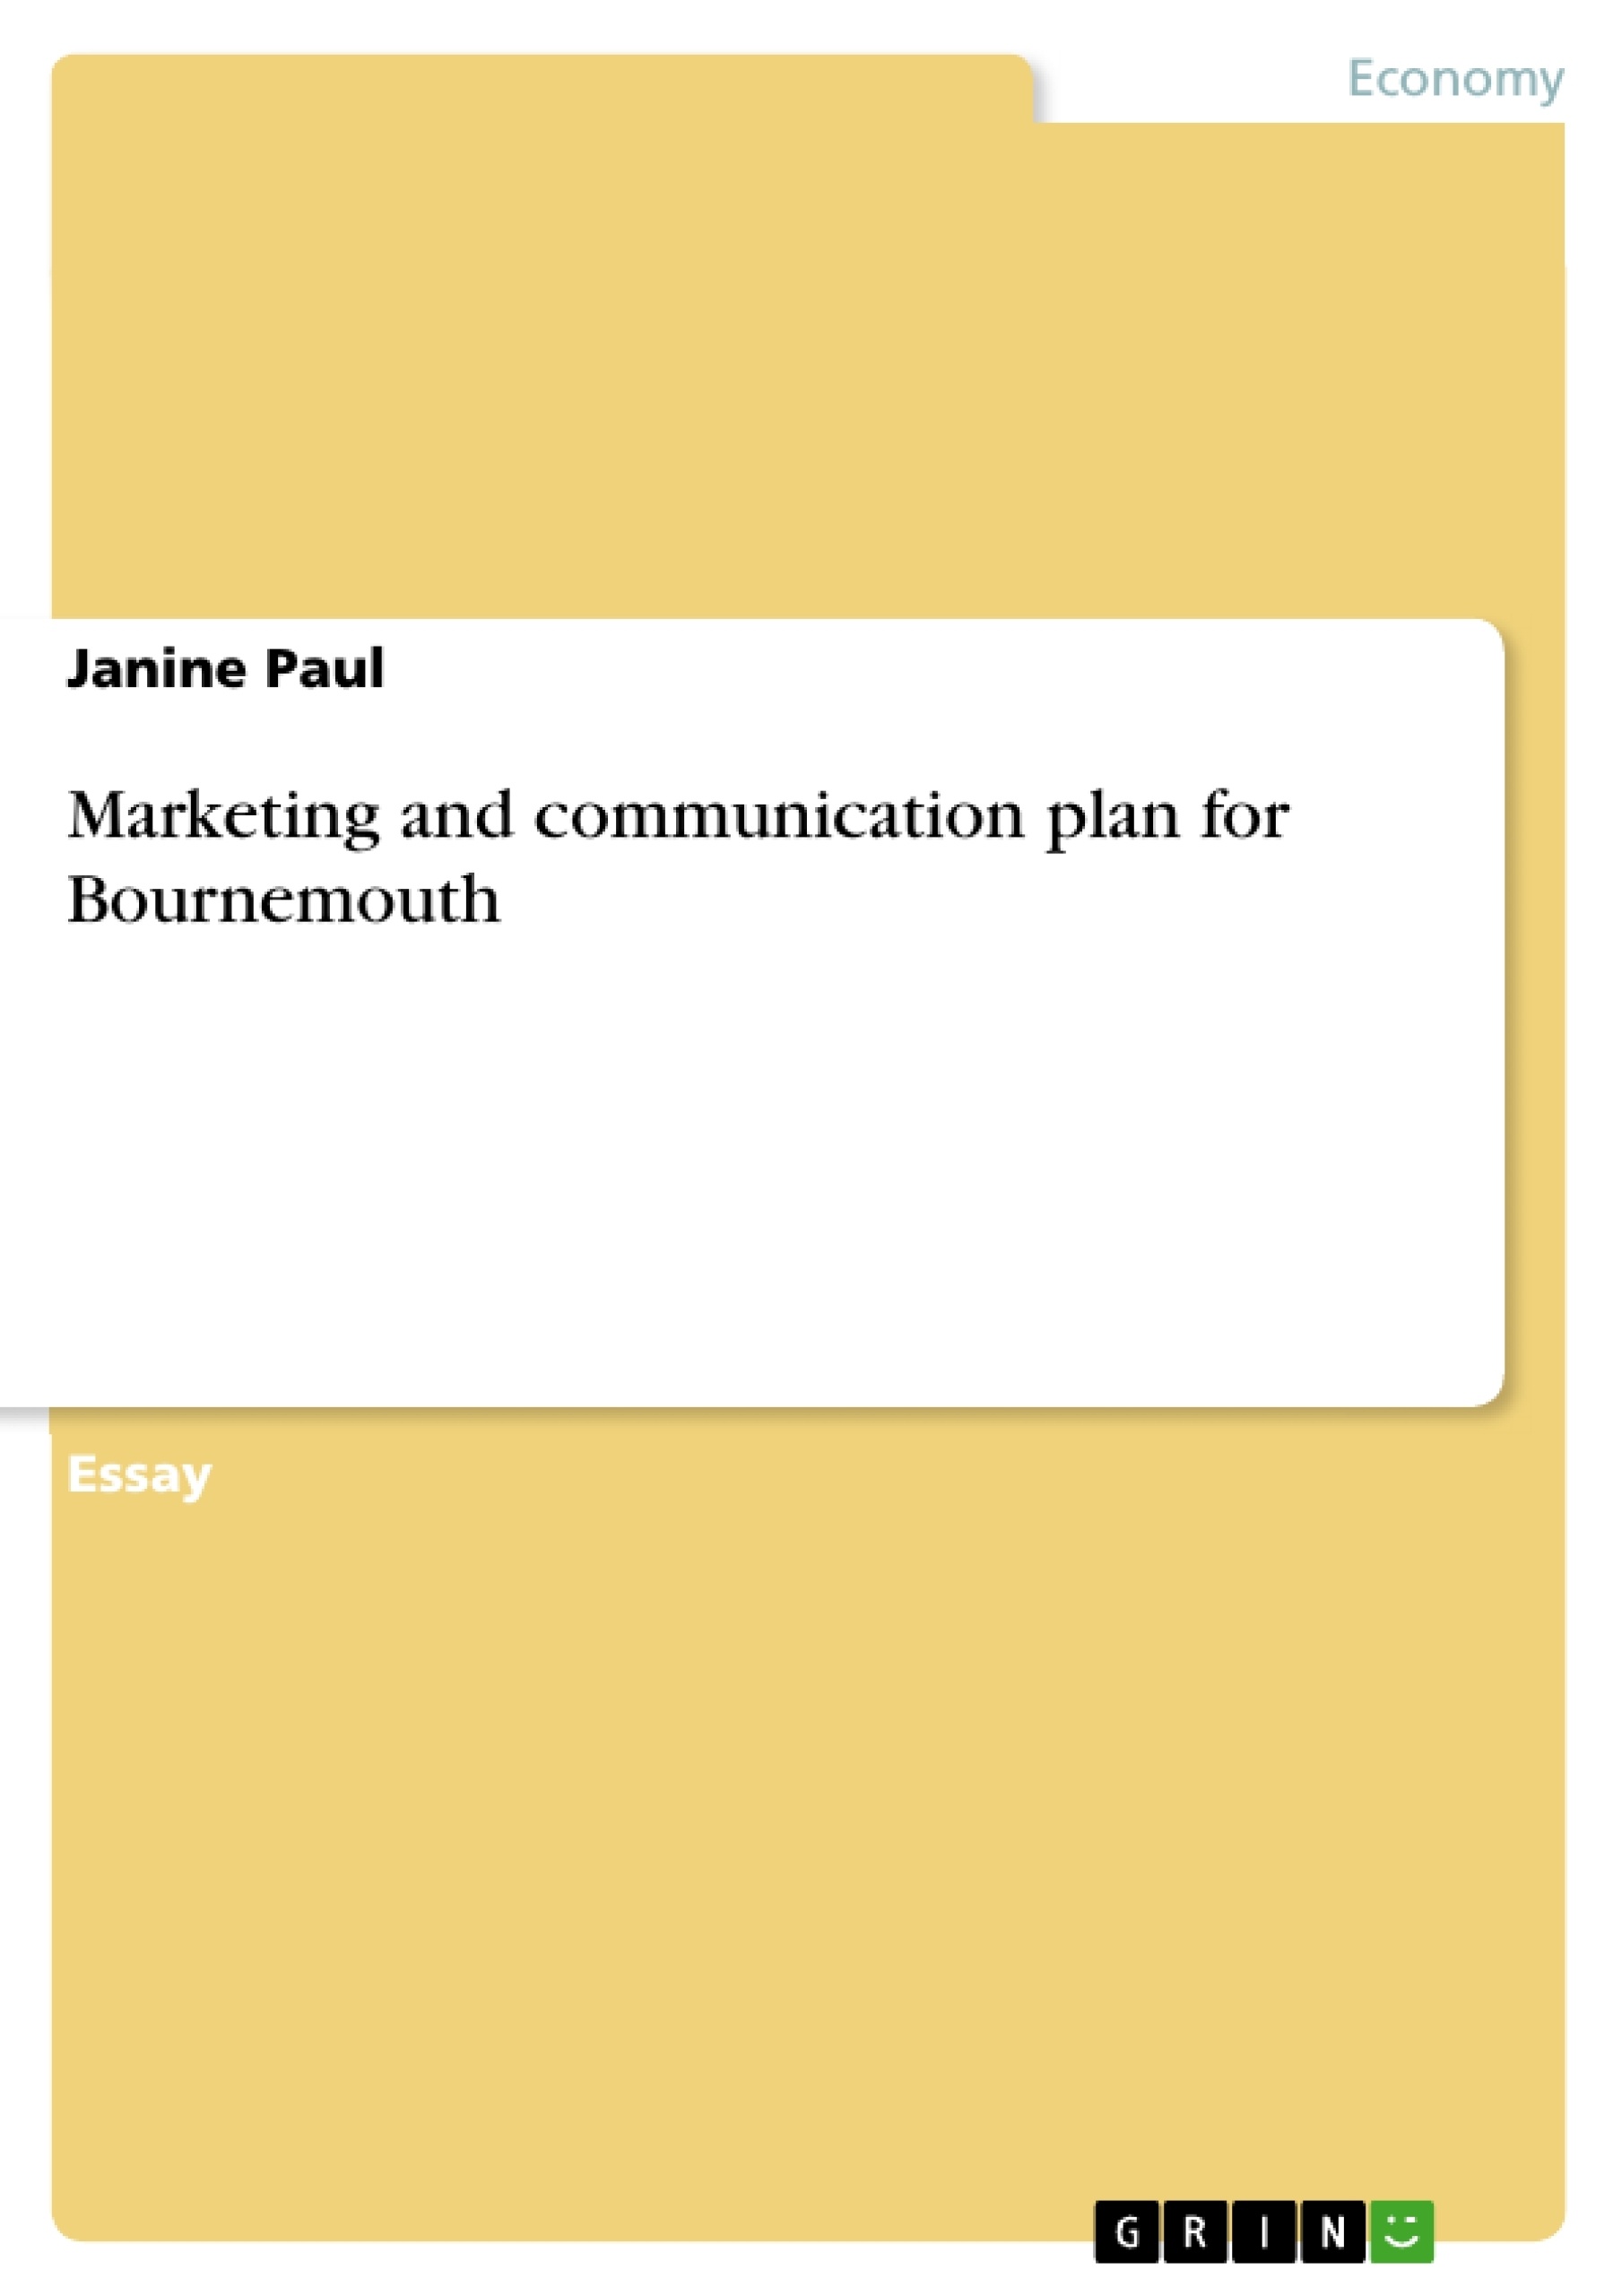 Título: Marketing and communication plan for Bournemouth